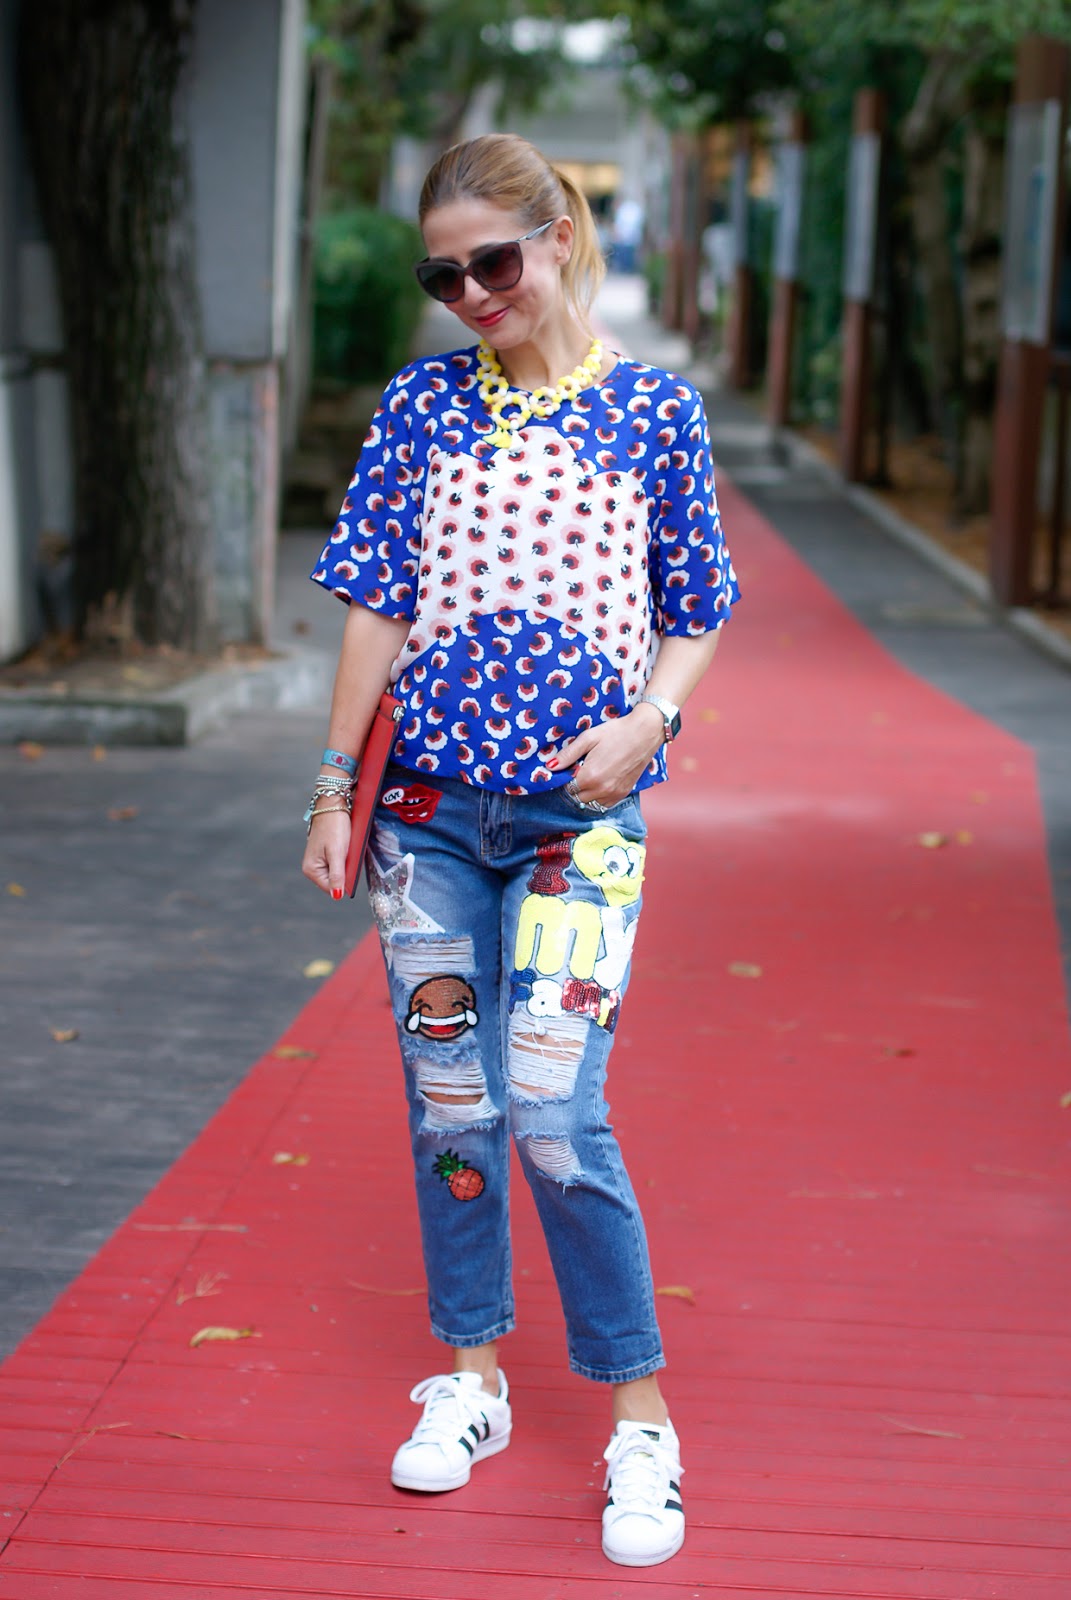 patched jeans with whatsapp emoji patch on Fashion and Cookies fashion blog, fashion blogger style